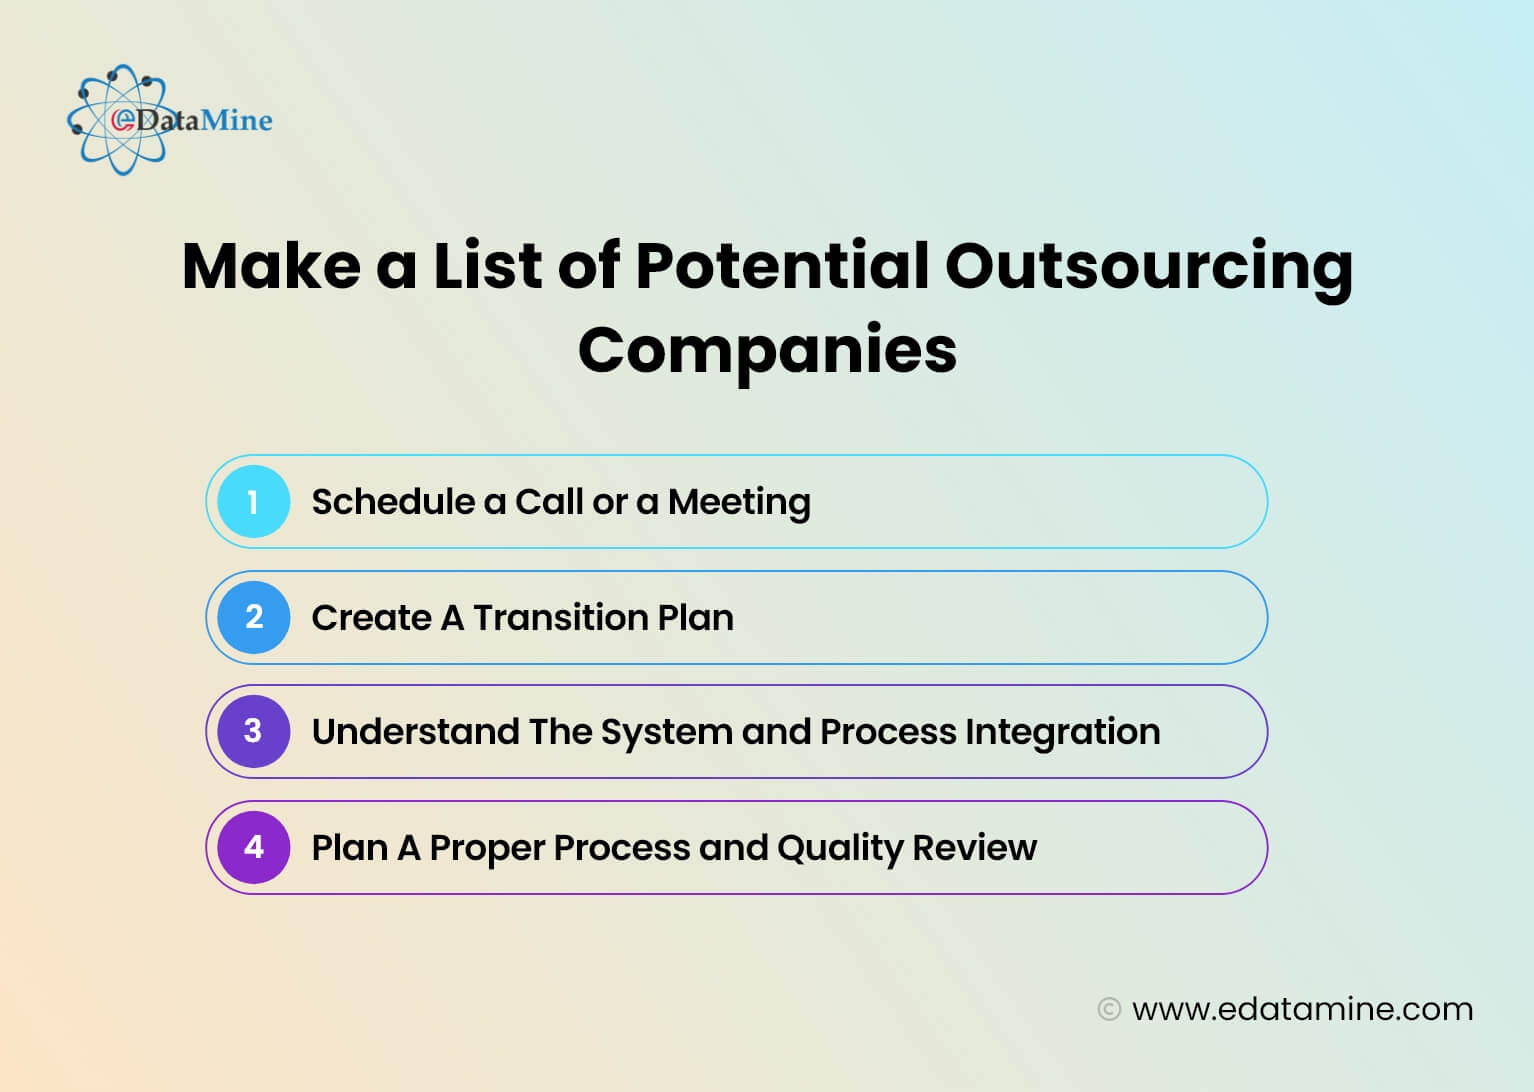 Make a List of Potential Outsourcing Companies